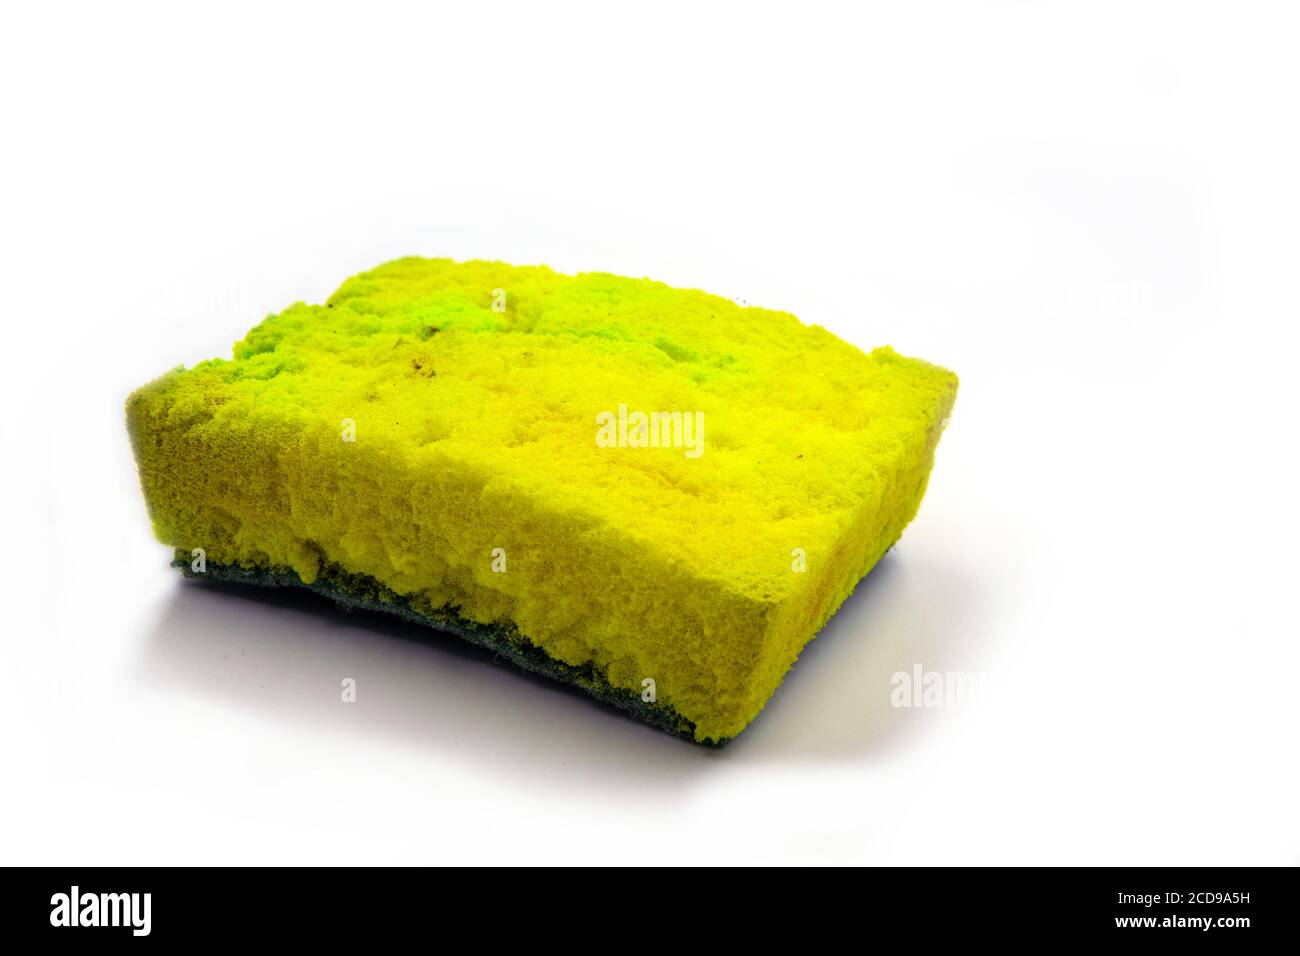 Yellow foam rubber sponge for dishwashing on white background. House  cleaning tool. Simple everyday cleaning sponge studio photo. Everyday  routine dom Stock Photo - Alamy